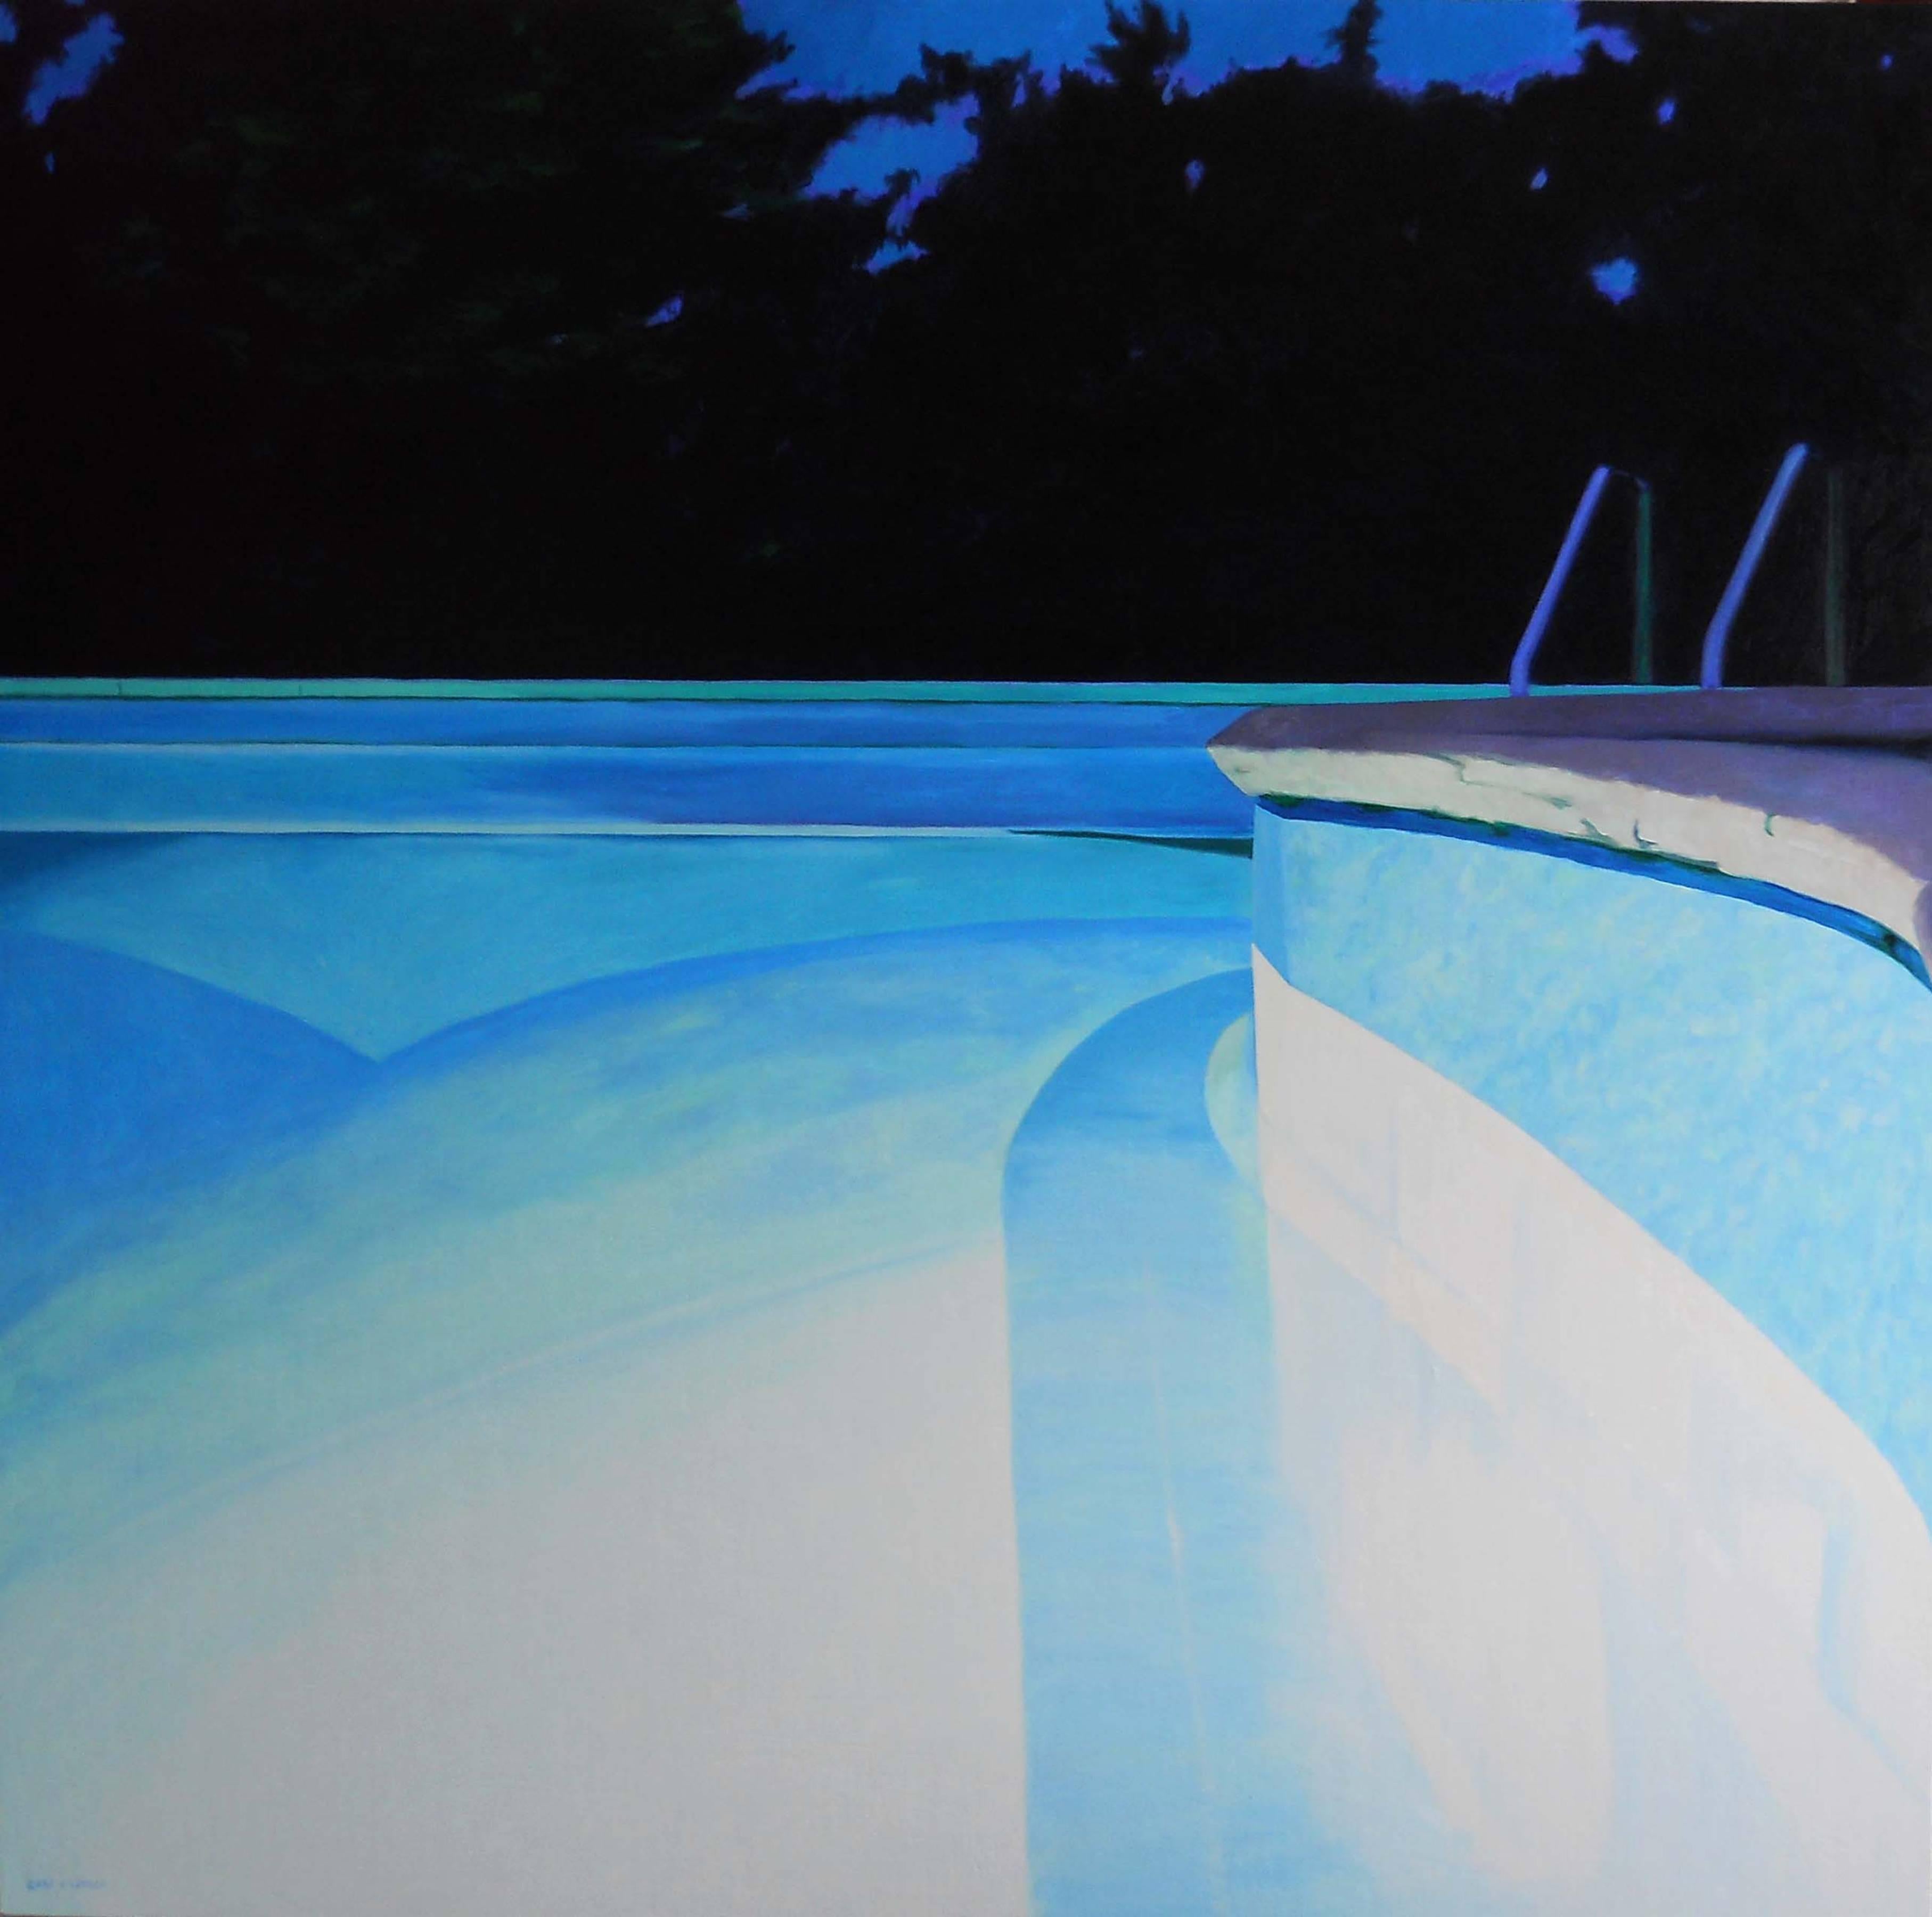 Kat O'Connor, &quot;Twilight Curve&quot;, Oil on panel, 40&quot; x 40&quot;

&quot;Twilight Curve&quot; features a pool at night, like the one in Marfa, Texas that inspired O'Connor to begin this current series &quot;Water: Pools and Figures&quot;.